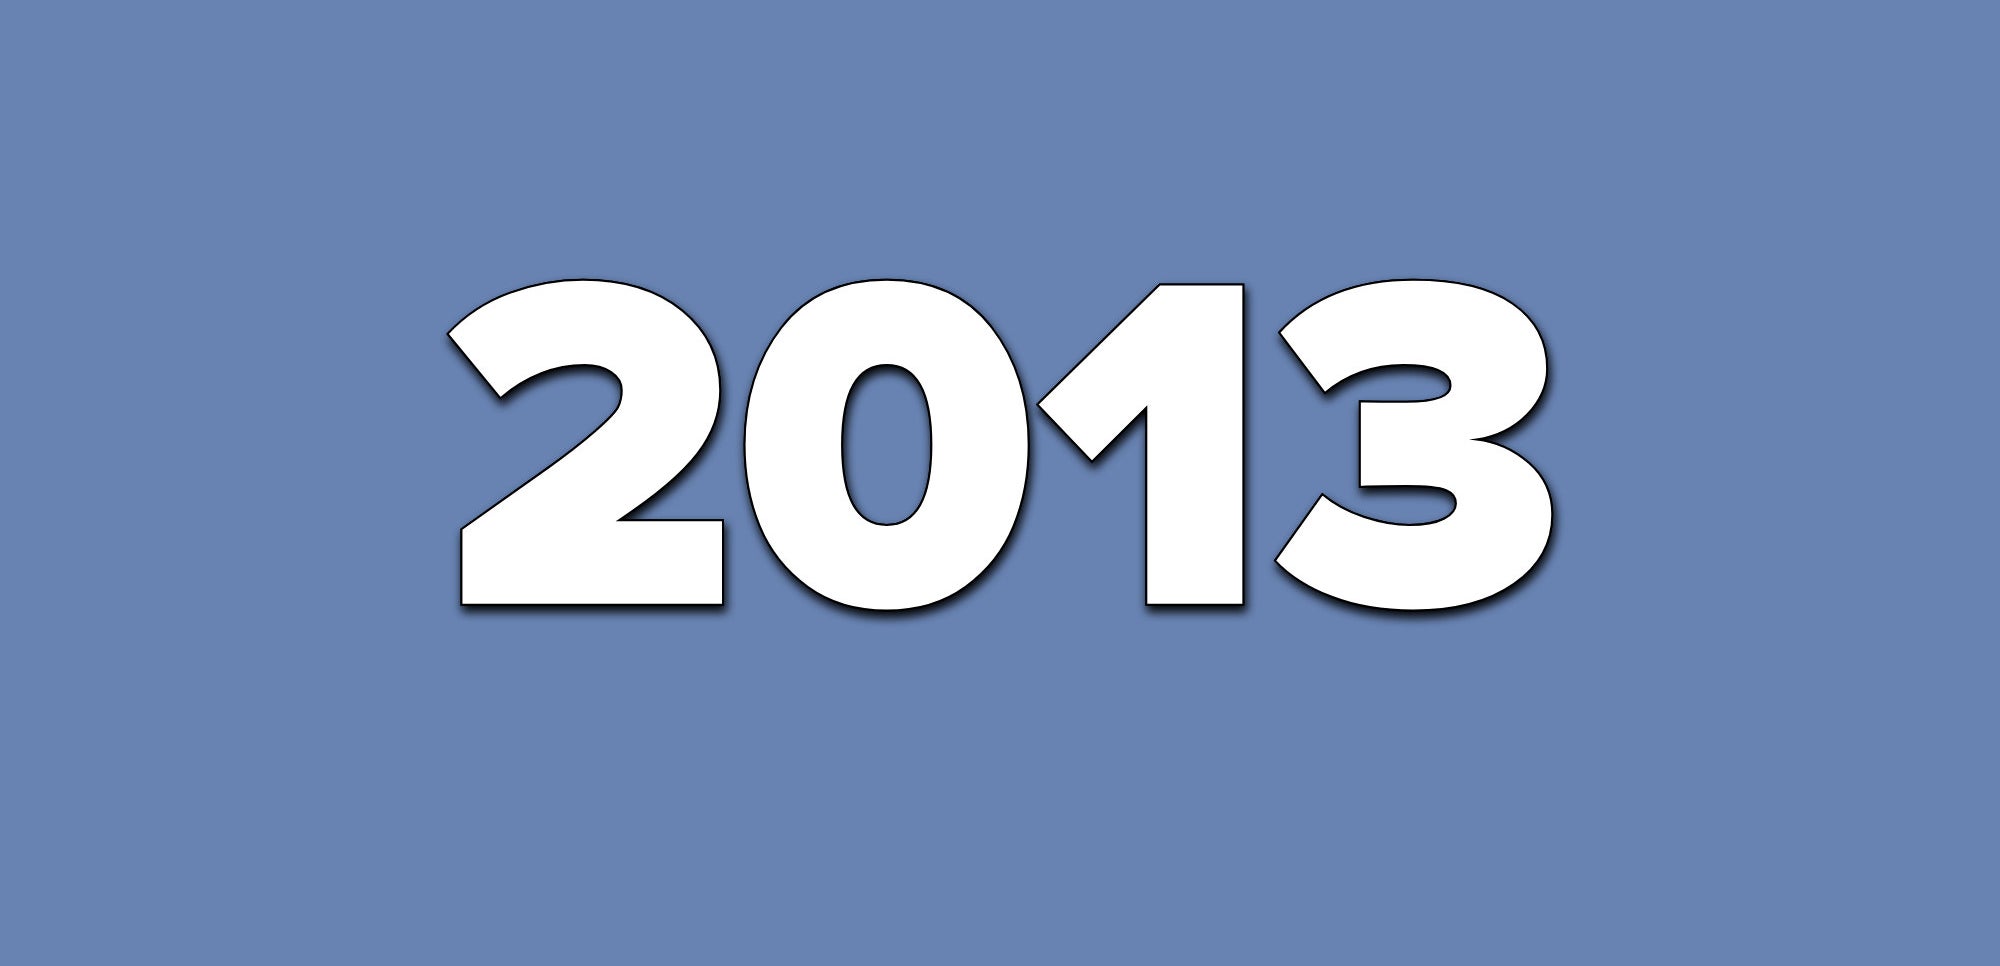 A blue background with text that says 2013